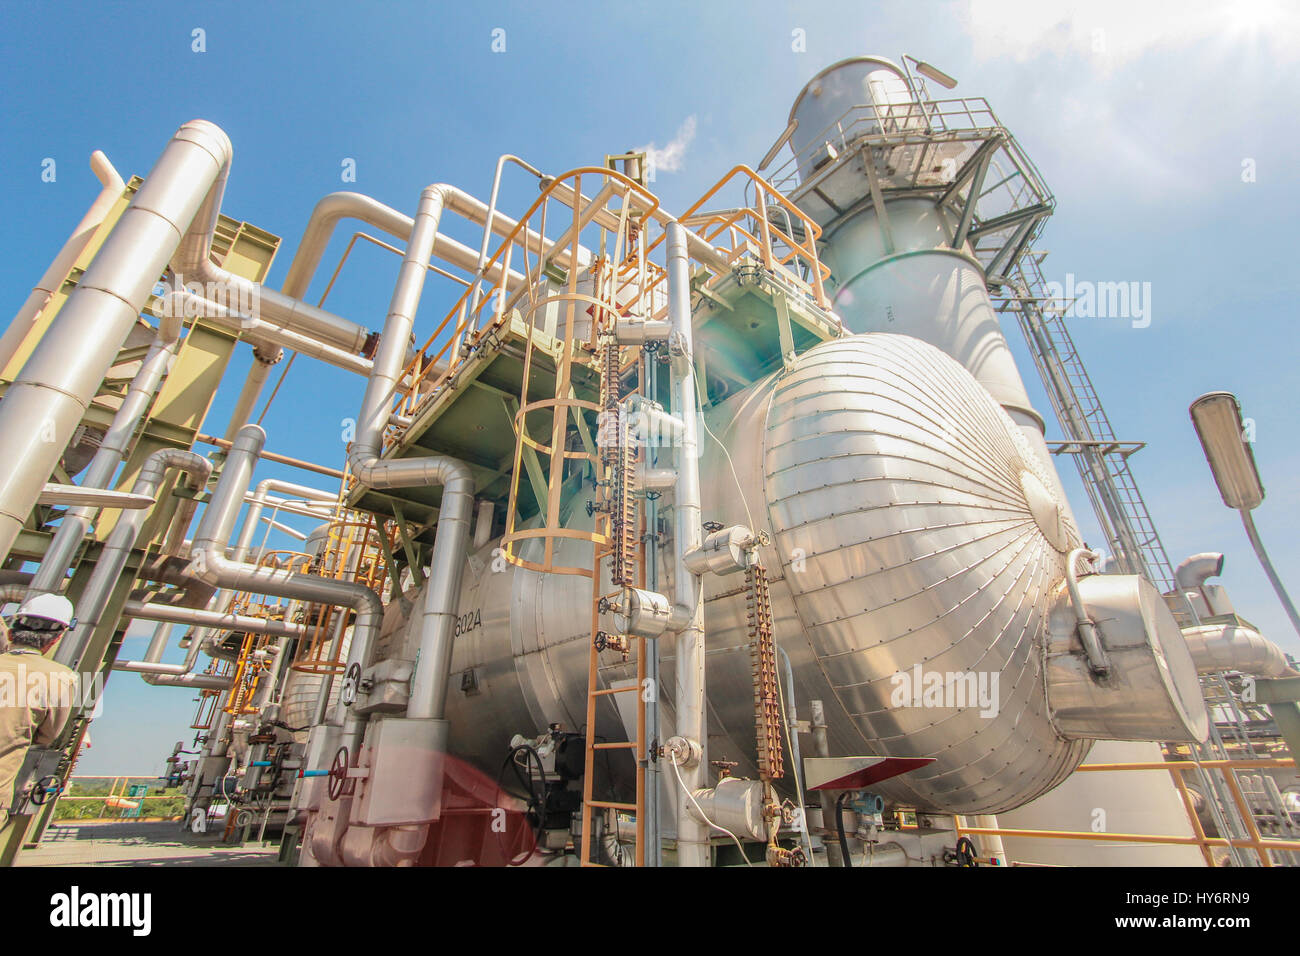 Industrial power plant with blue sky Stock Photo